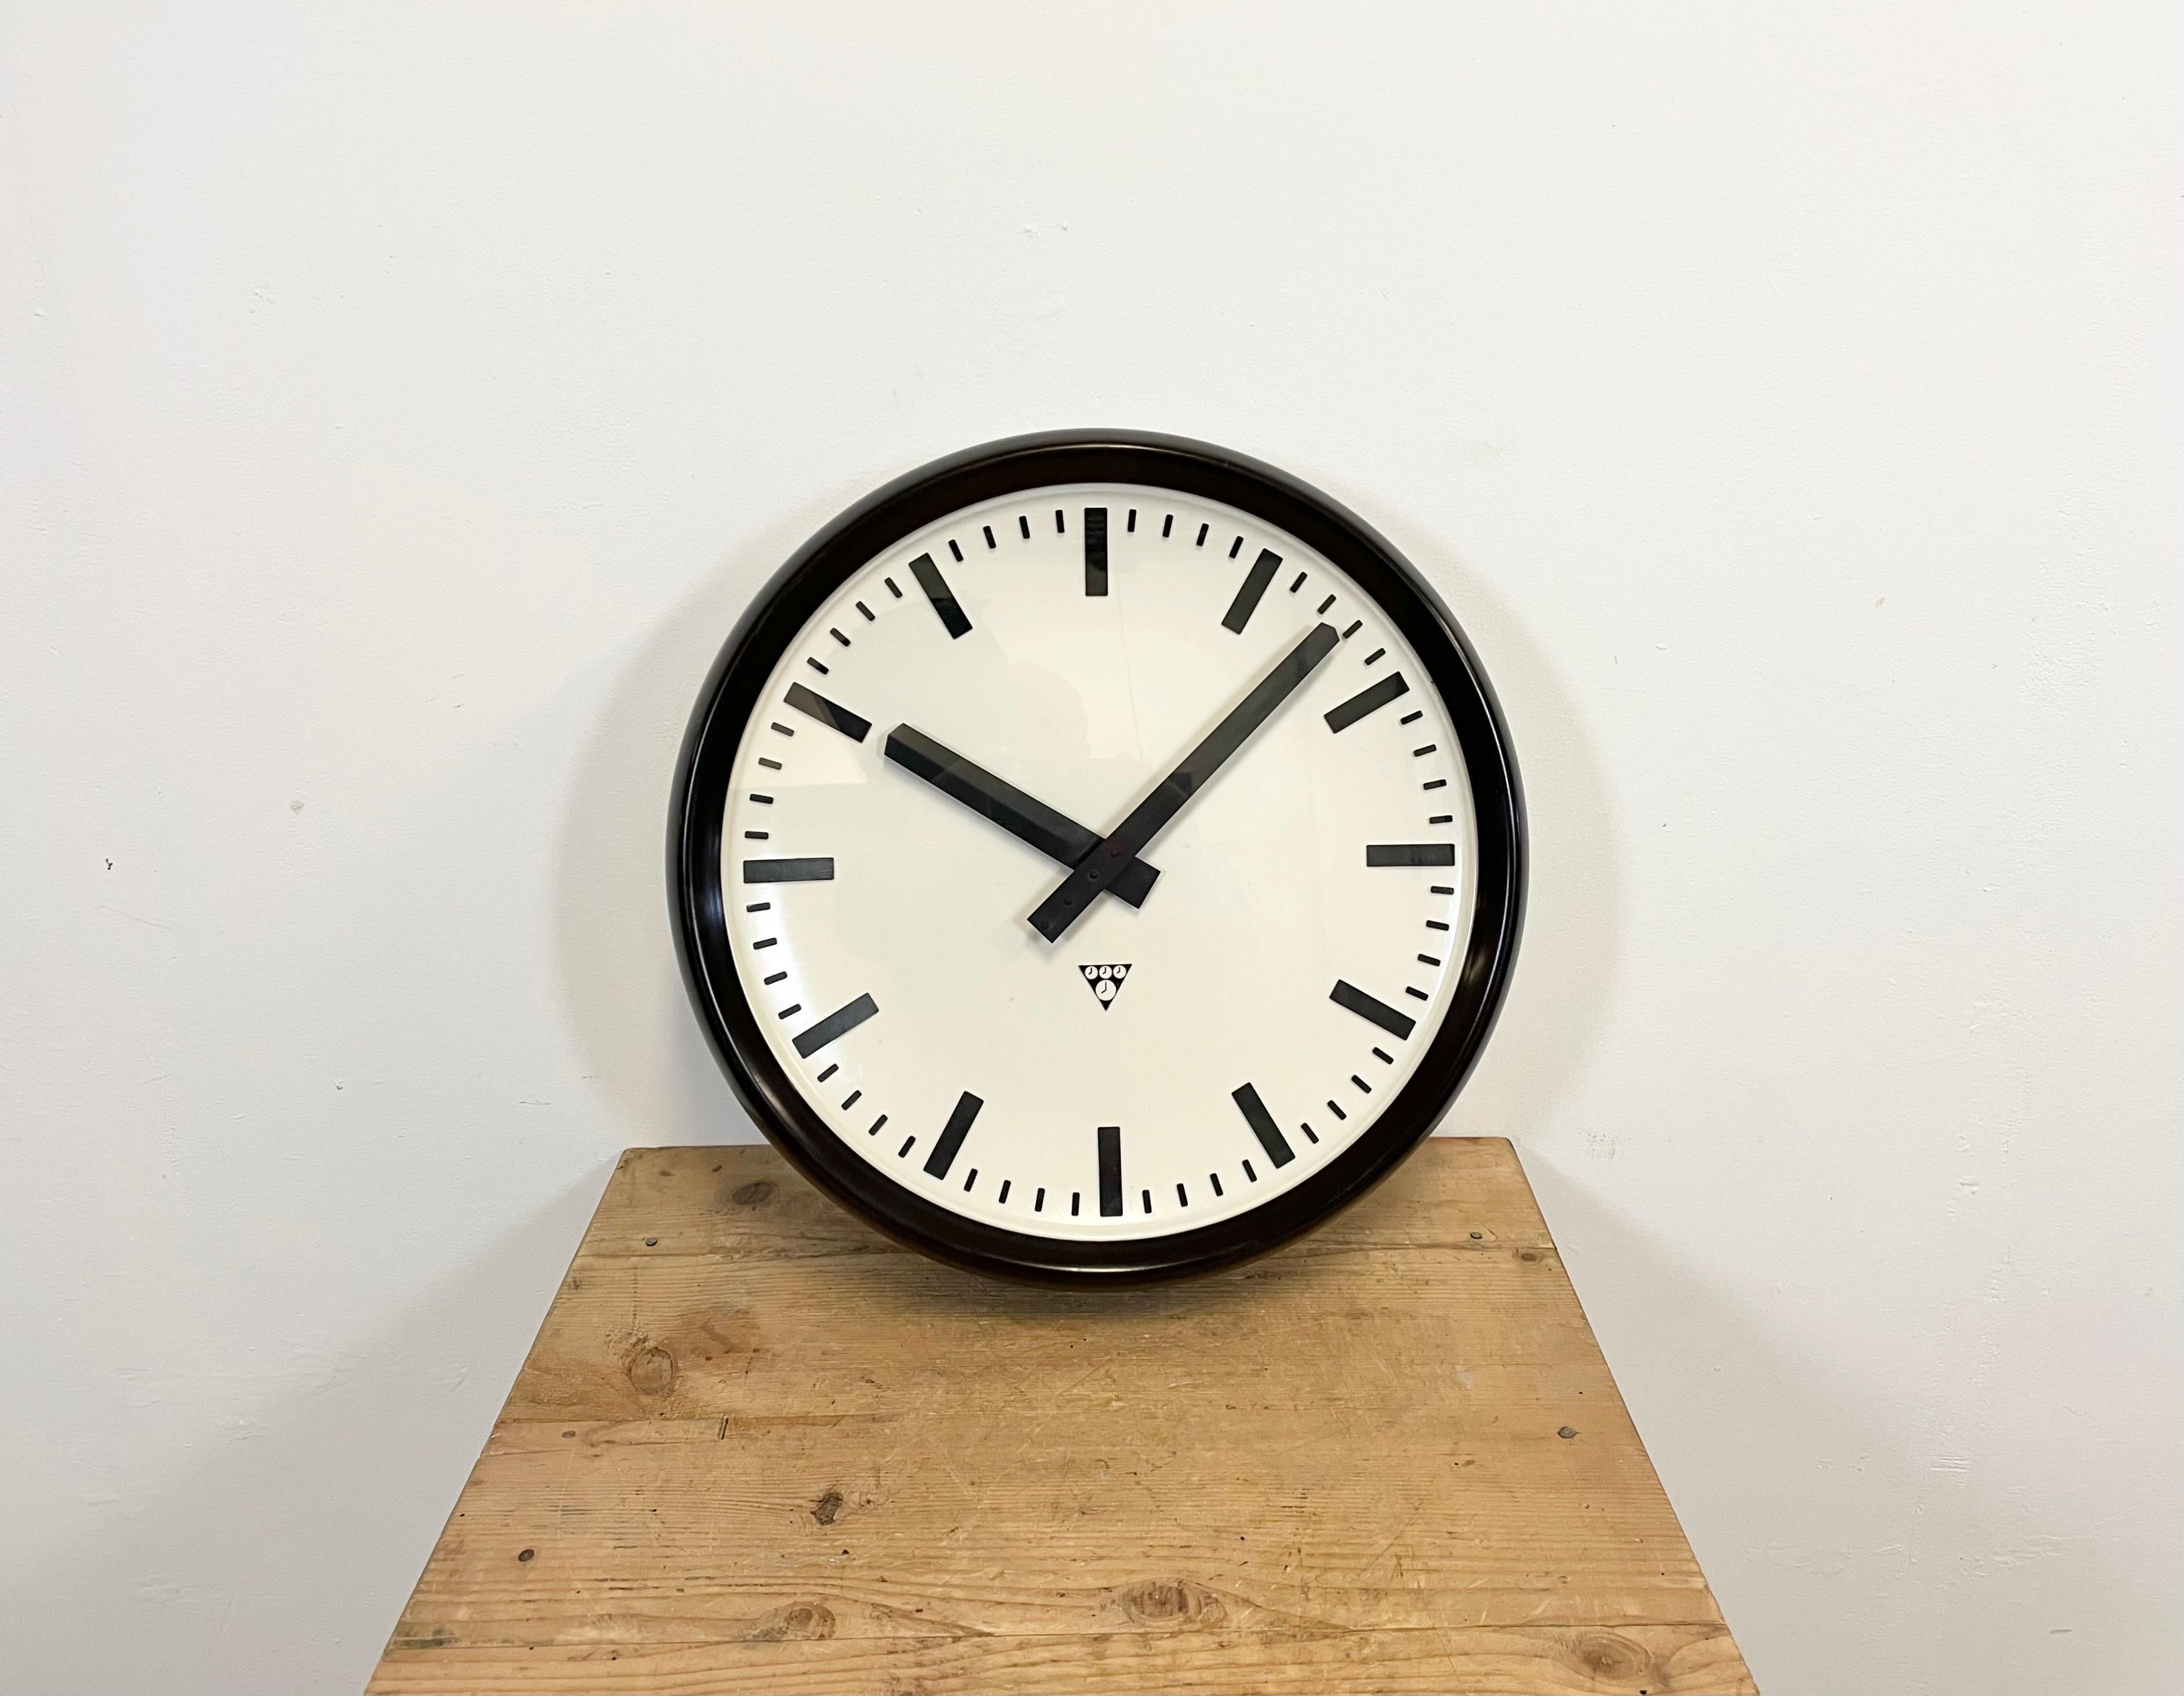 This large wall clock was produced by Pragotron in former Czechoslovakia during the 1960s. It features a brown Bakelite frame, a white Bakelite dial, an aluminium hands and a clear glass cover. The piece has been converted into a battery-powered